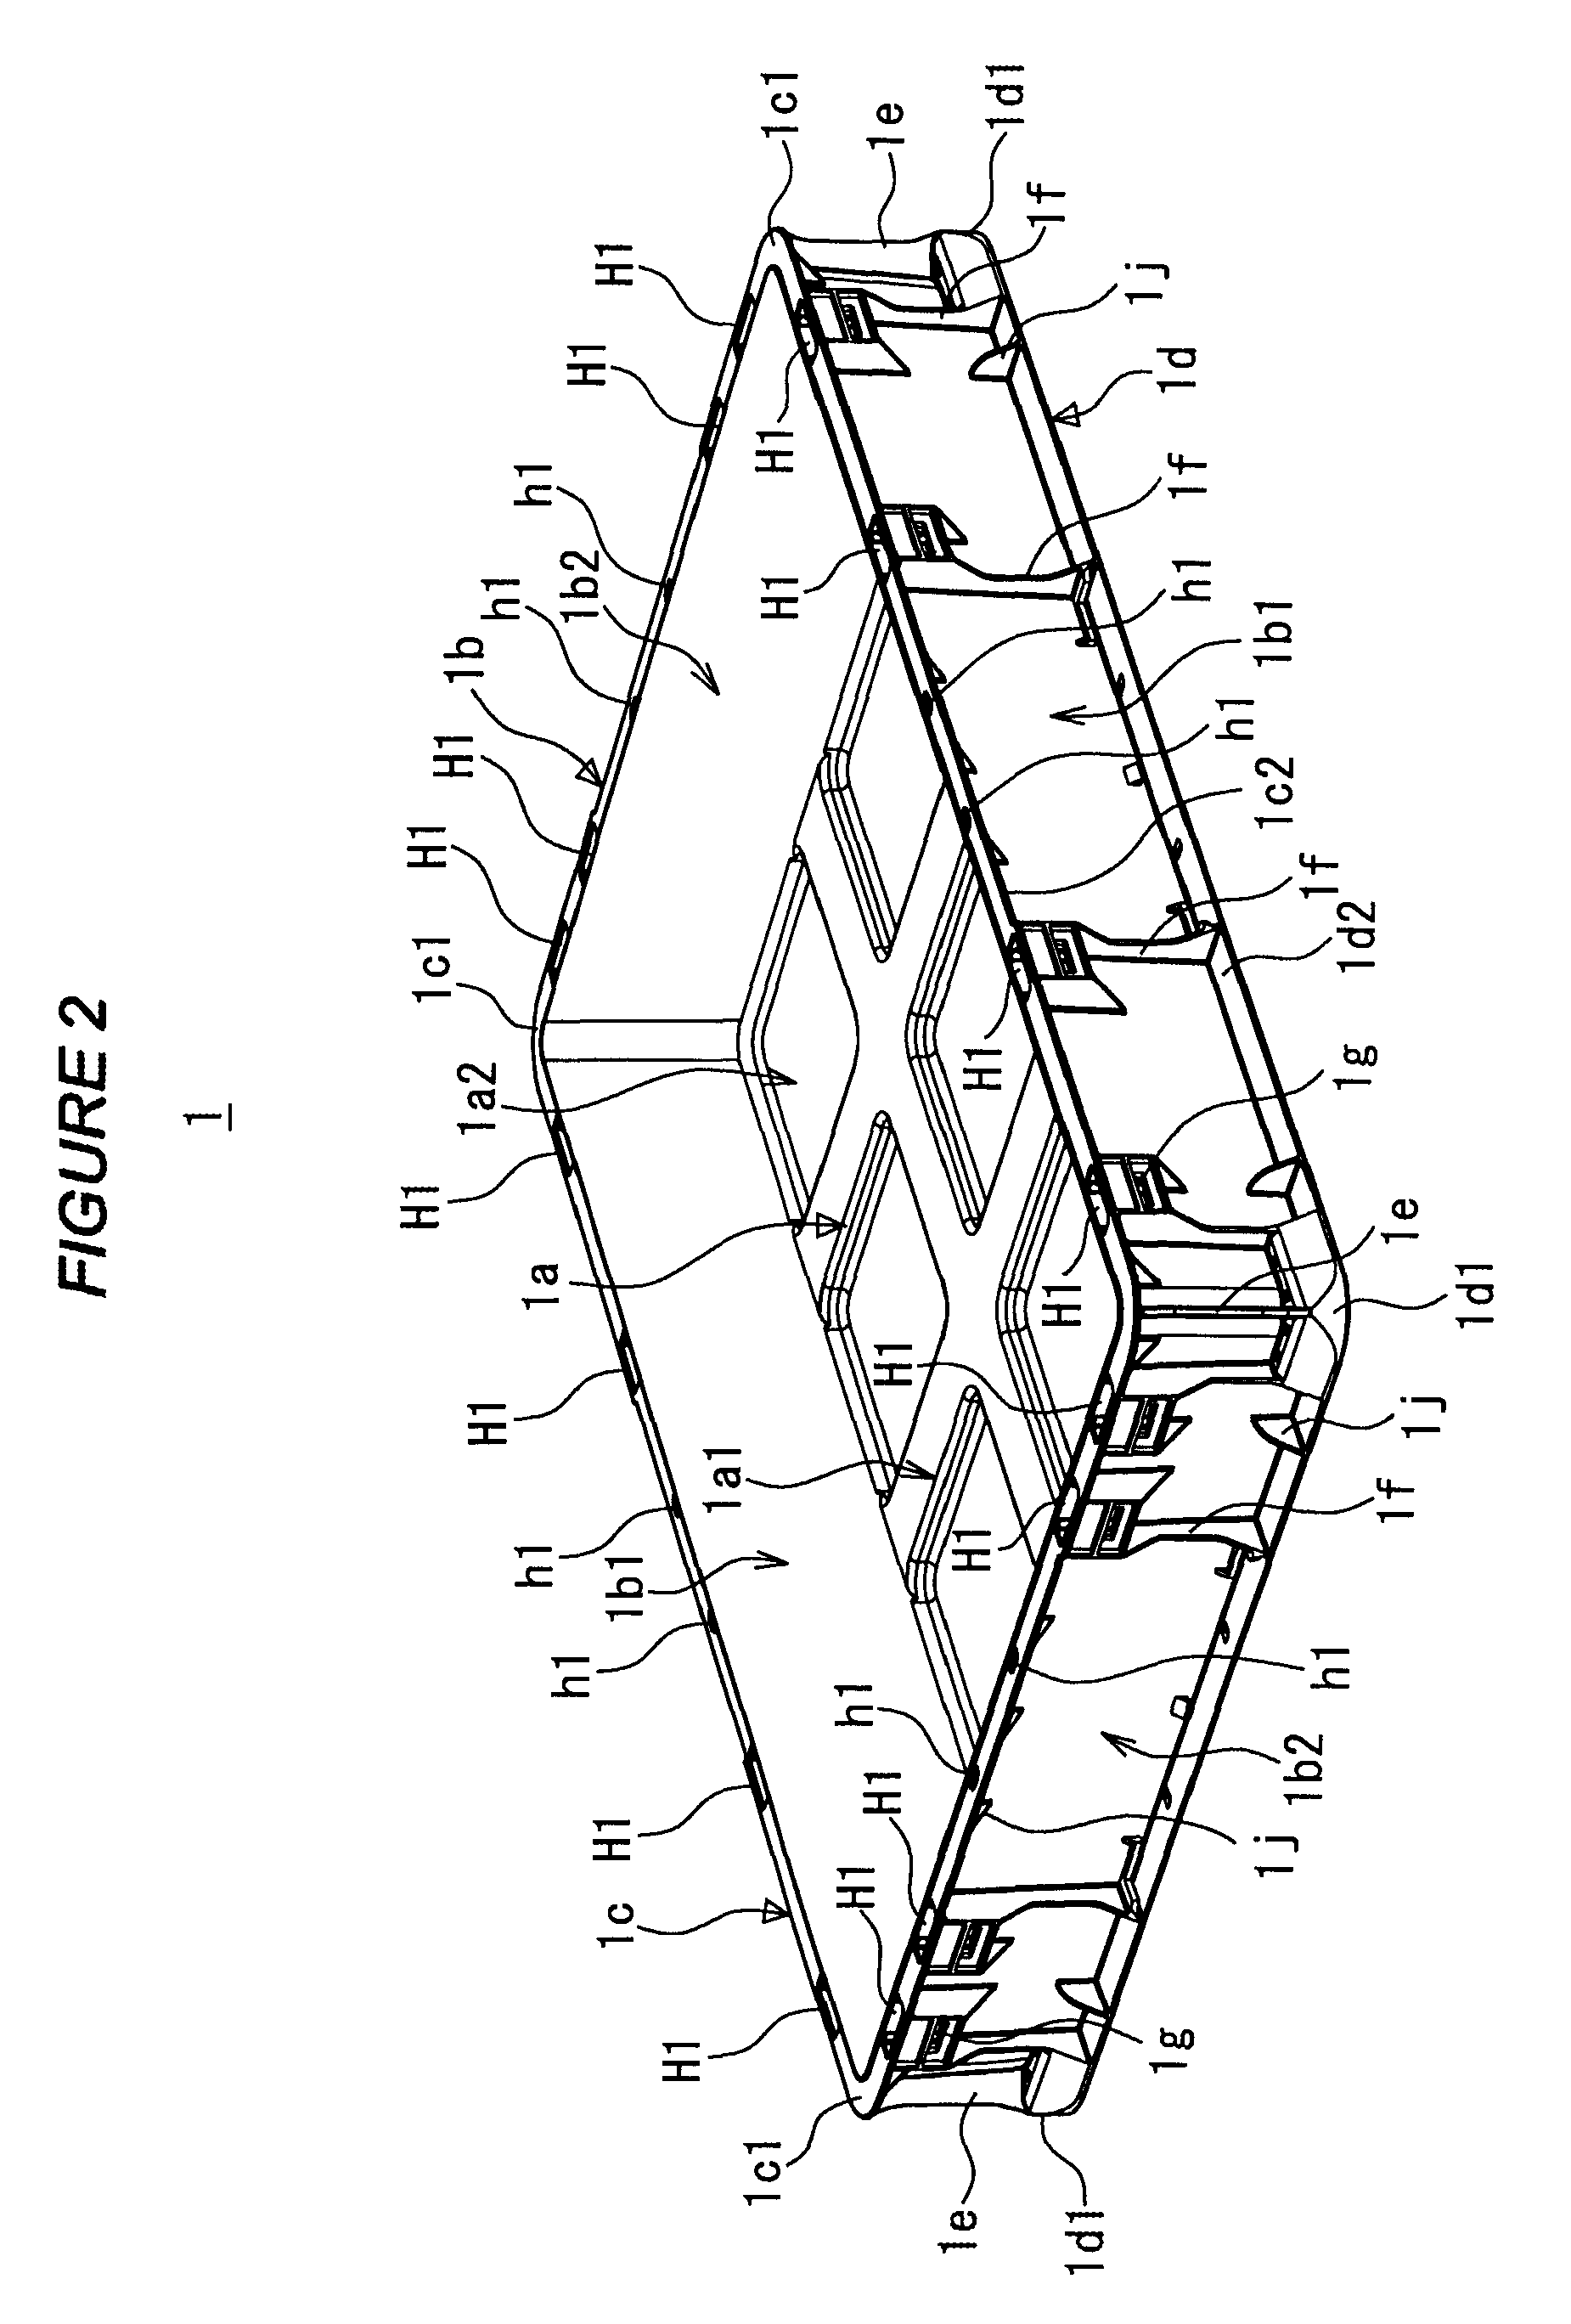 Assemblable and disassemblable container